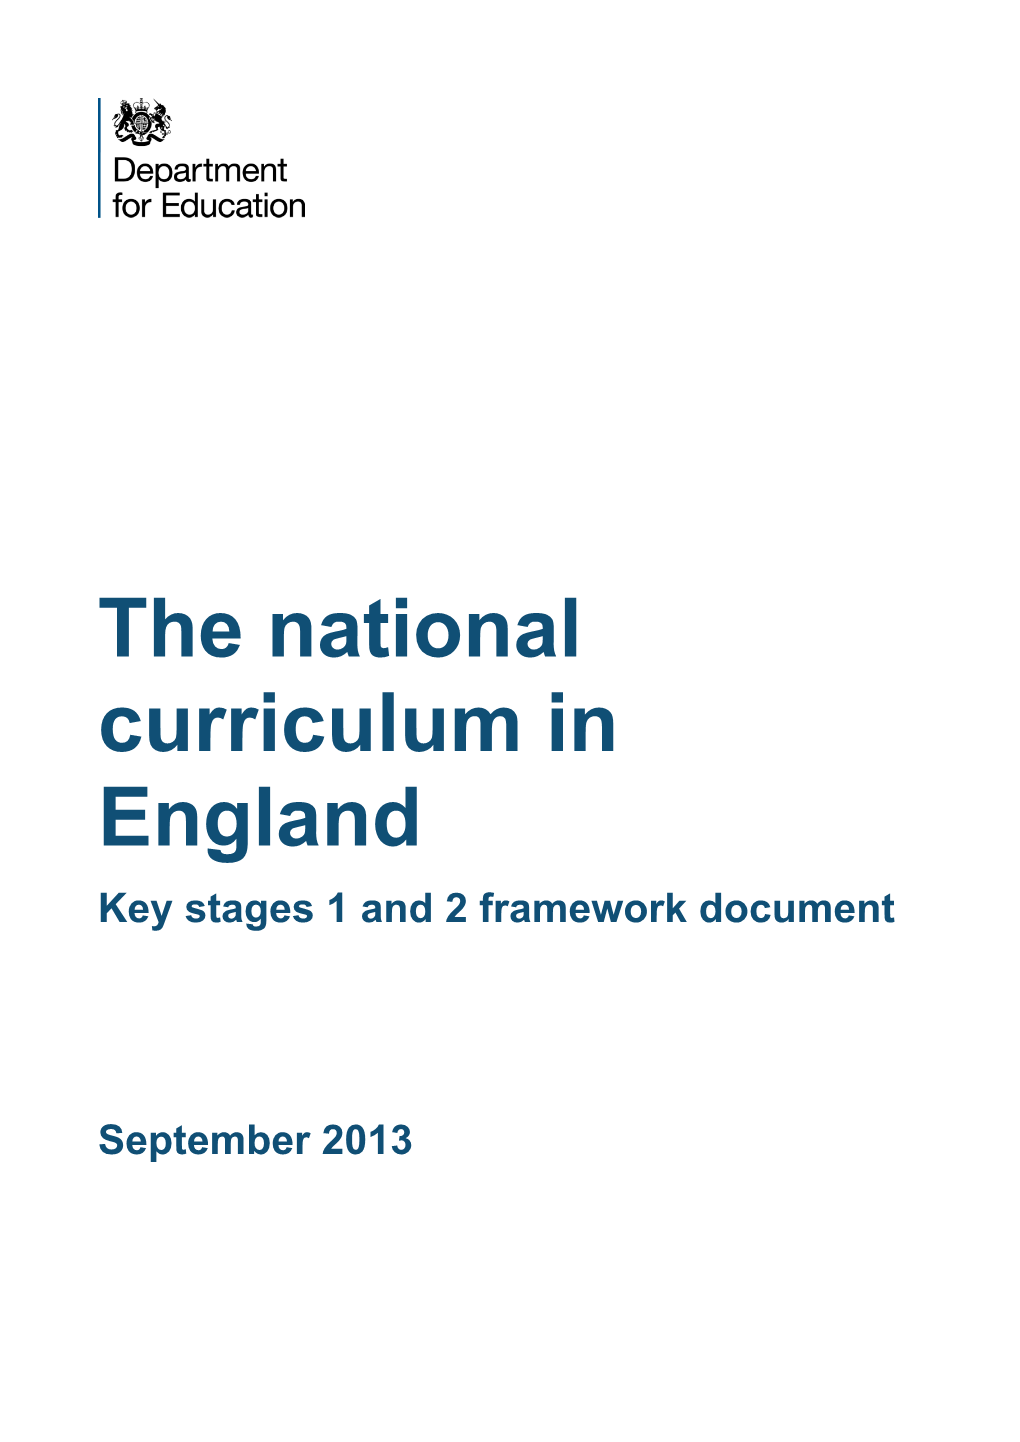 The National Curriculum in England Key Stages 1 and 2 Framework Document